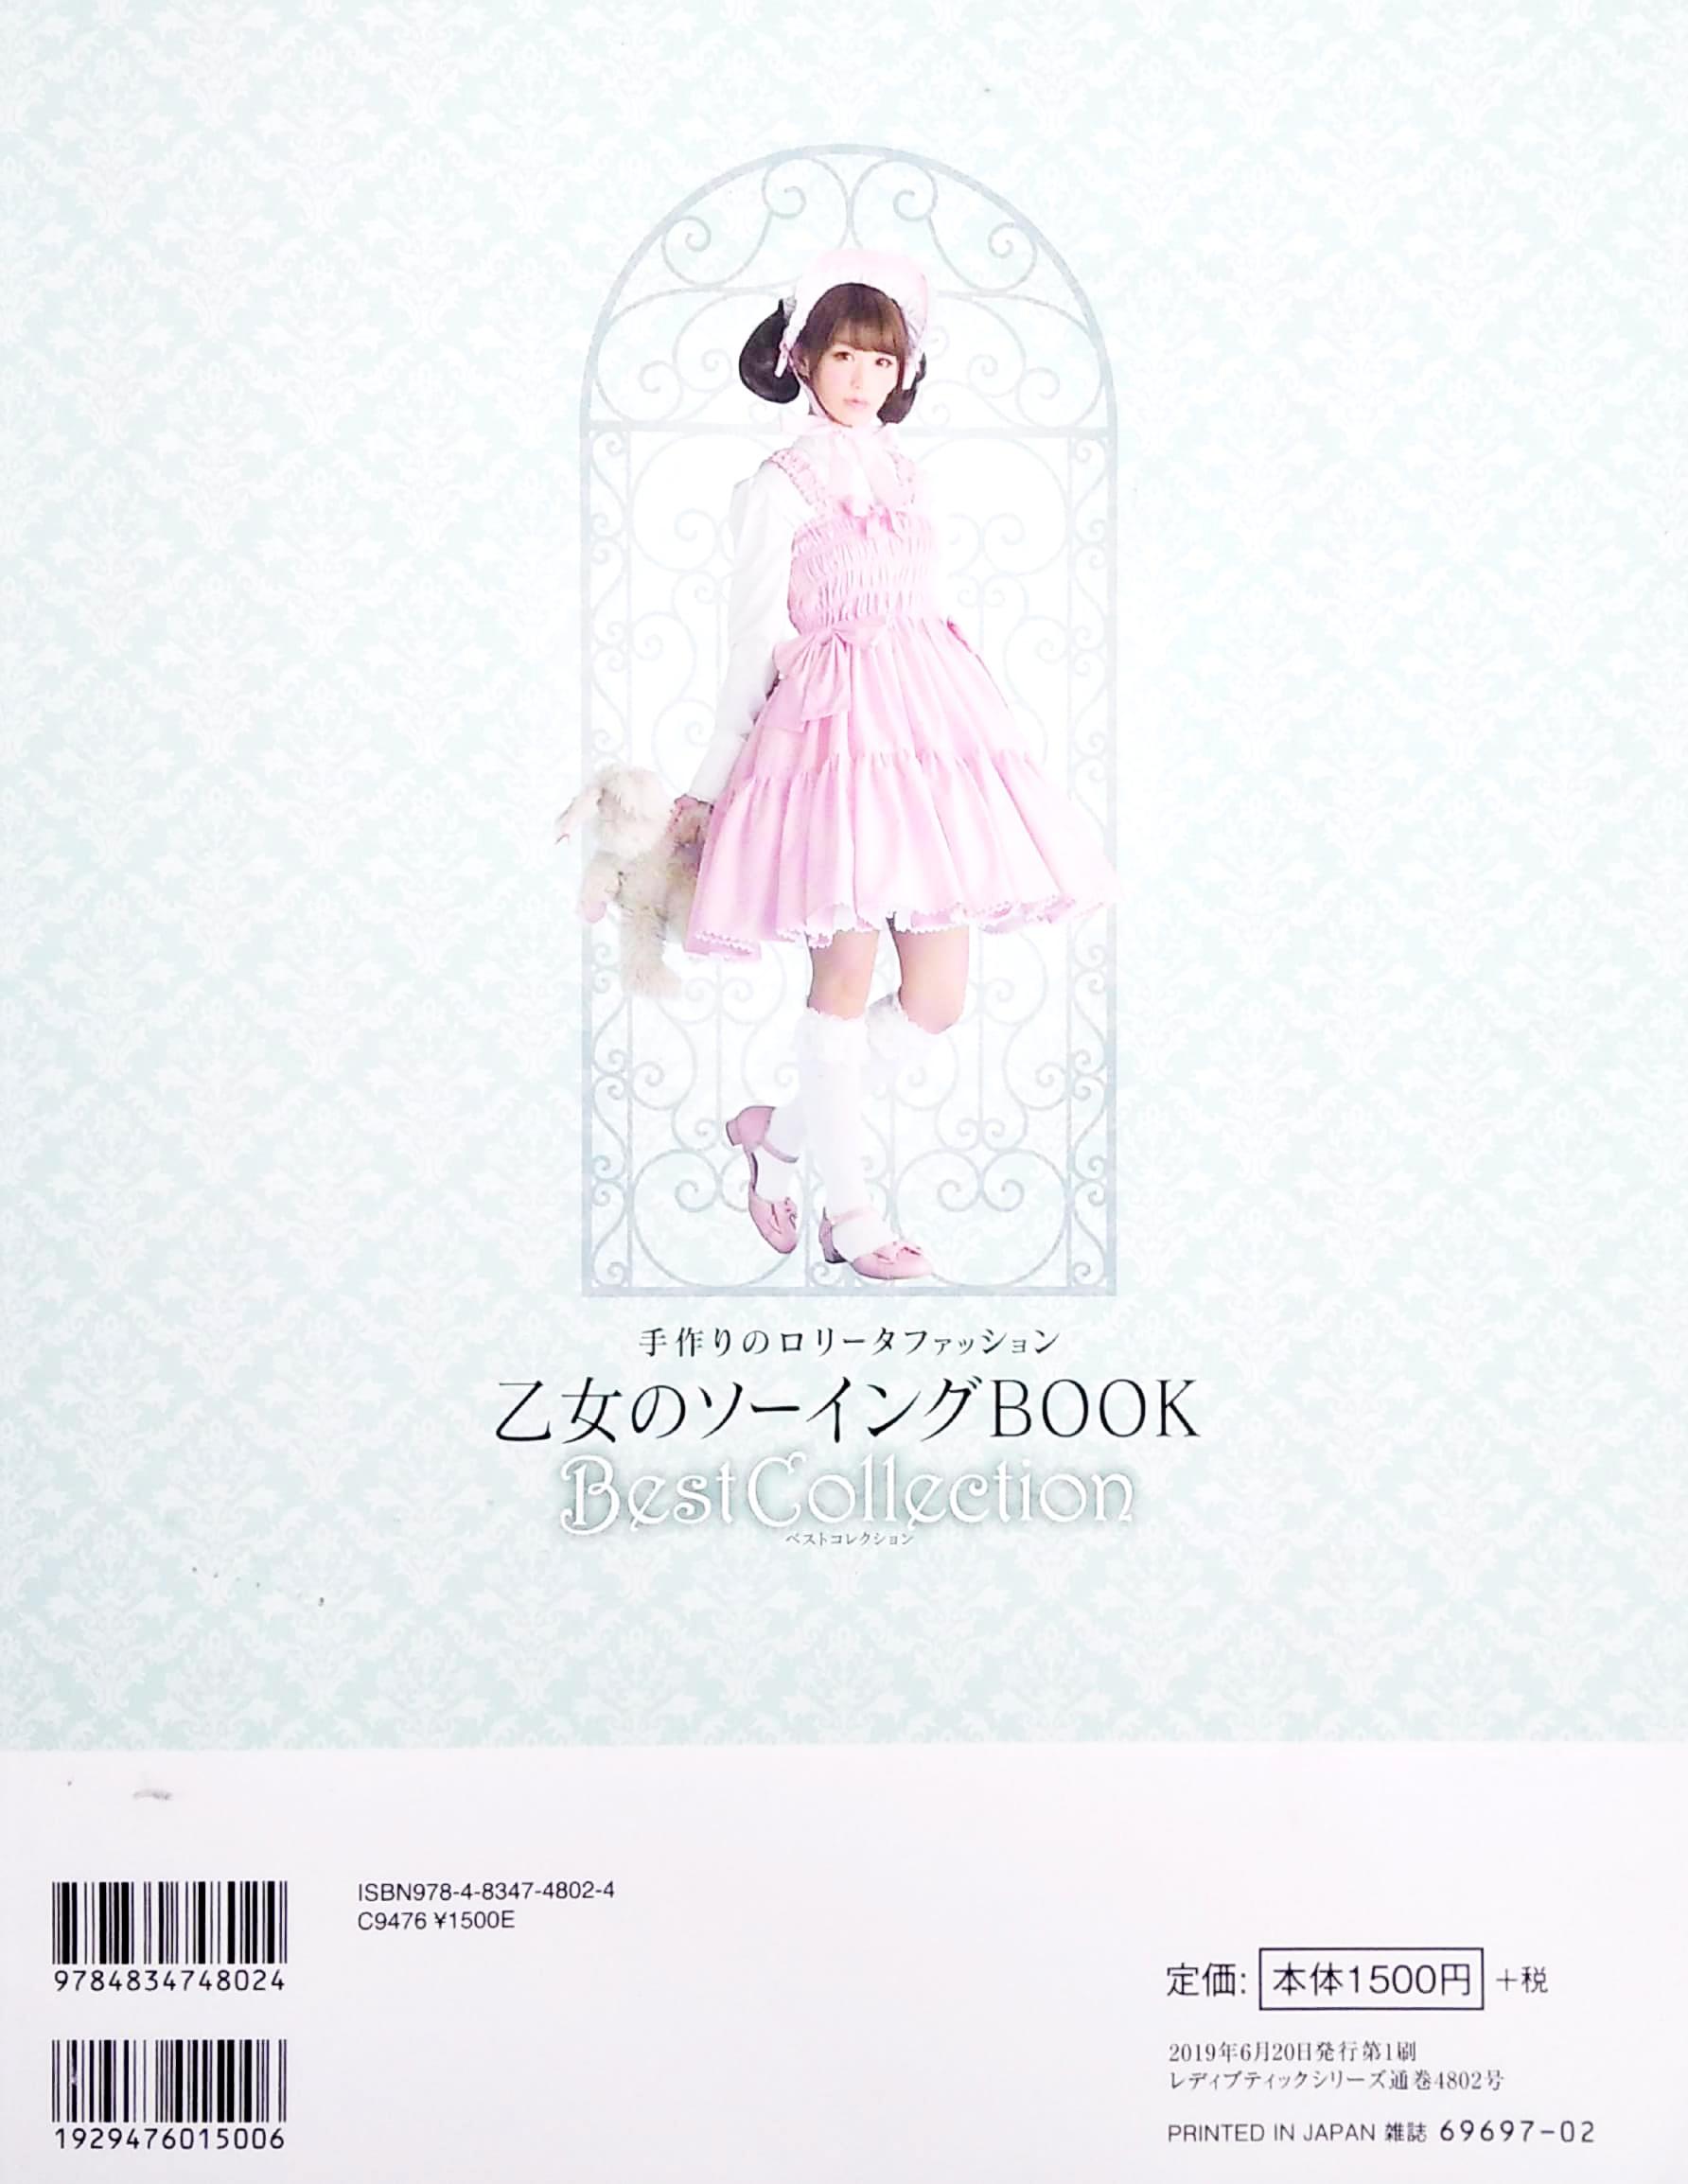 Book Of Girls Otome no Sewing Best Collection ~ Handmade Gothic Lolita Fashion (Japanese Edition)